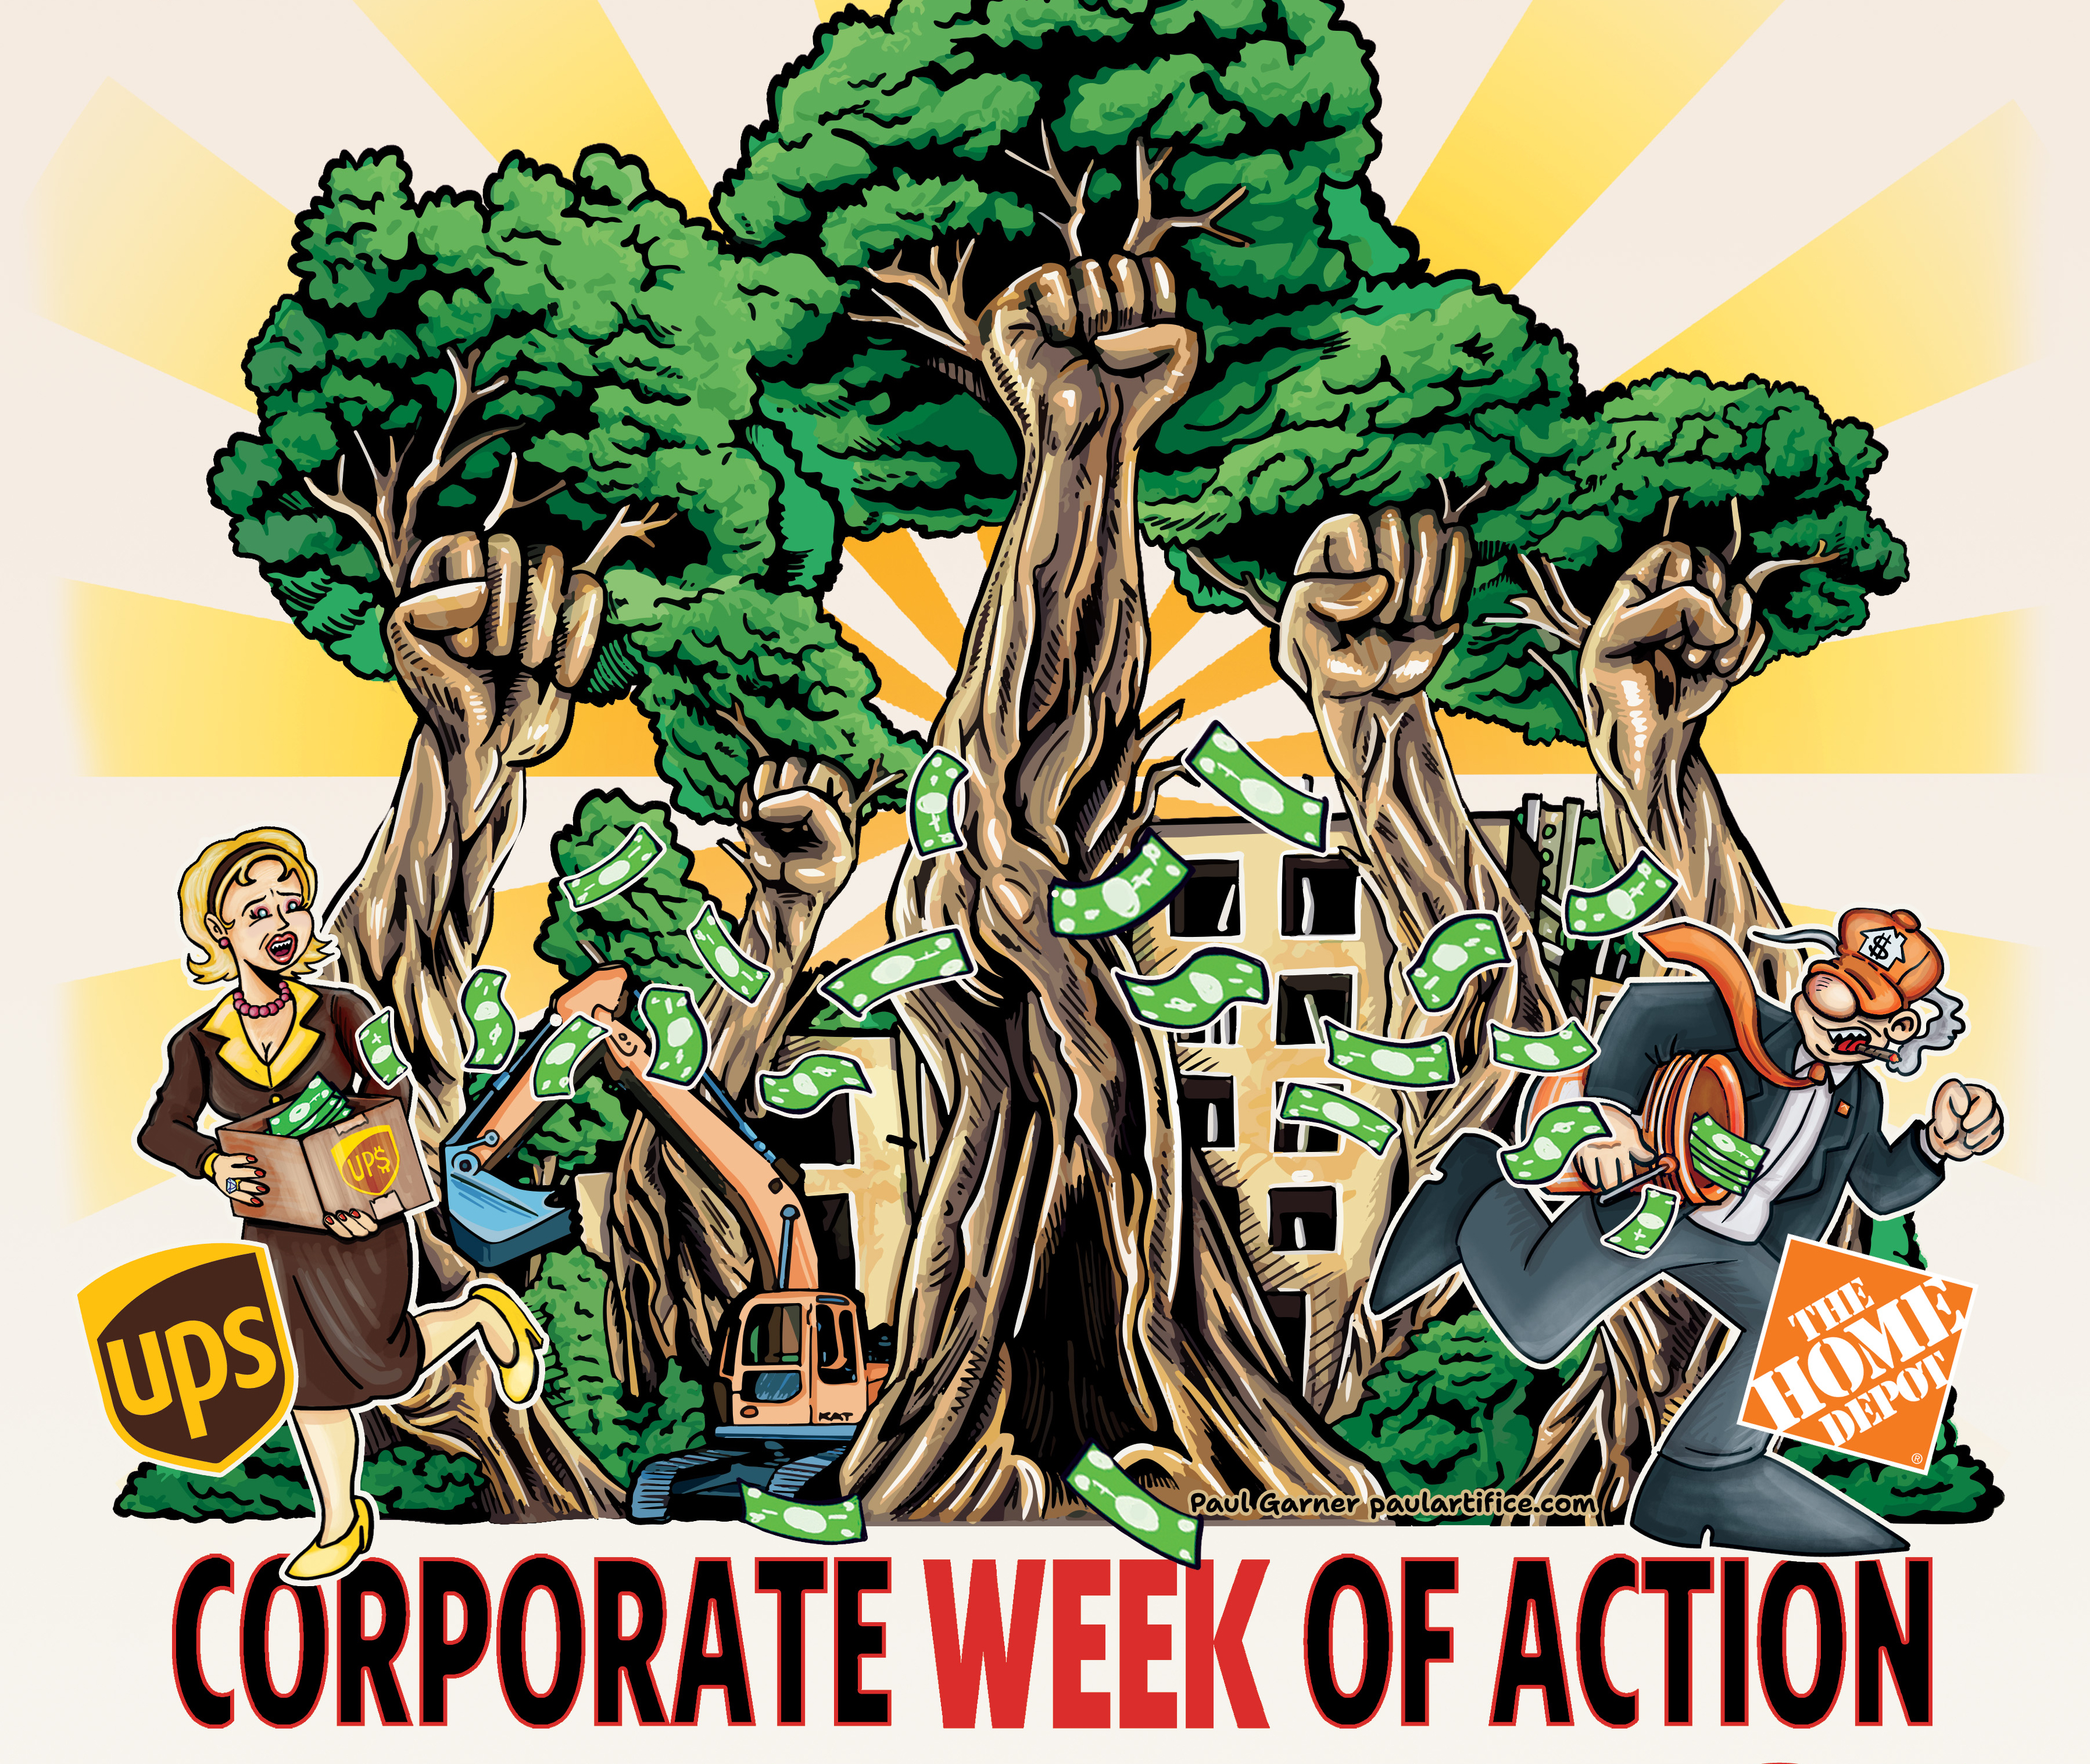 Actions target Home Depot, UPS, and other corporations involved in Cop City